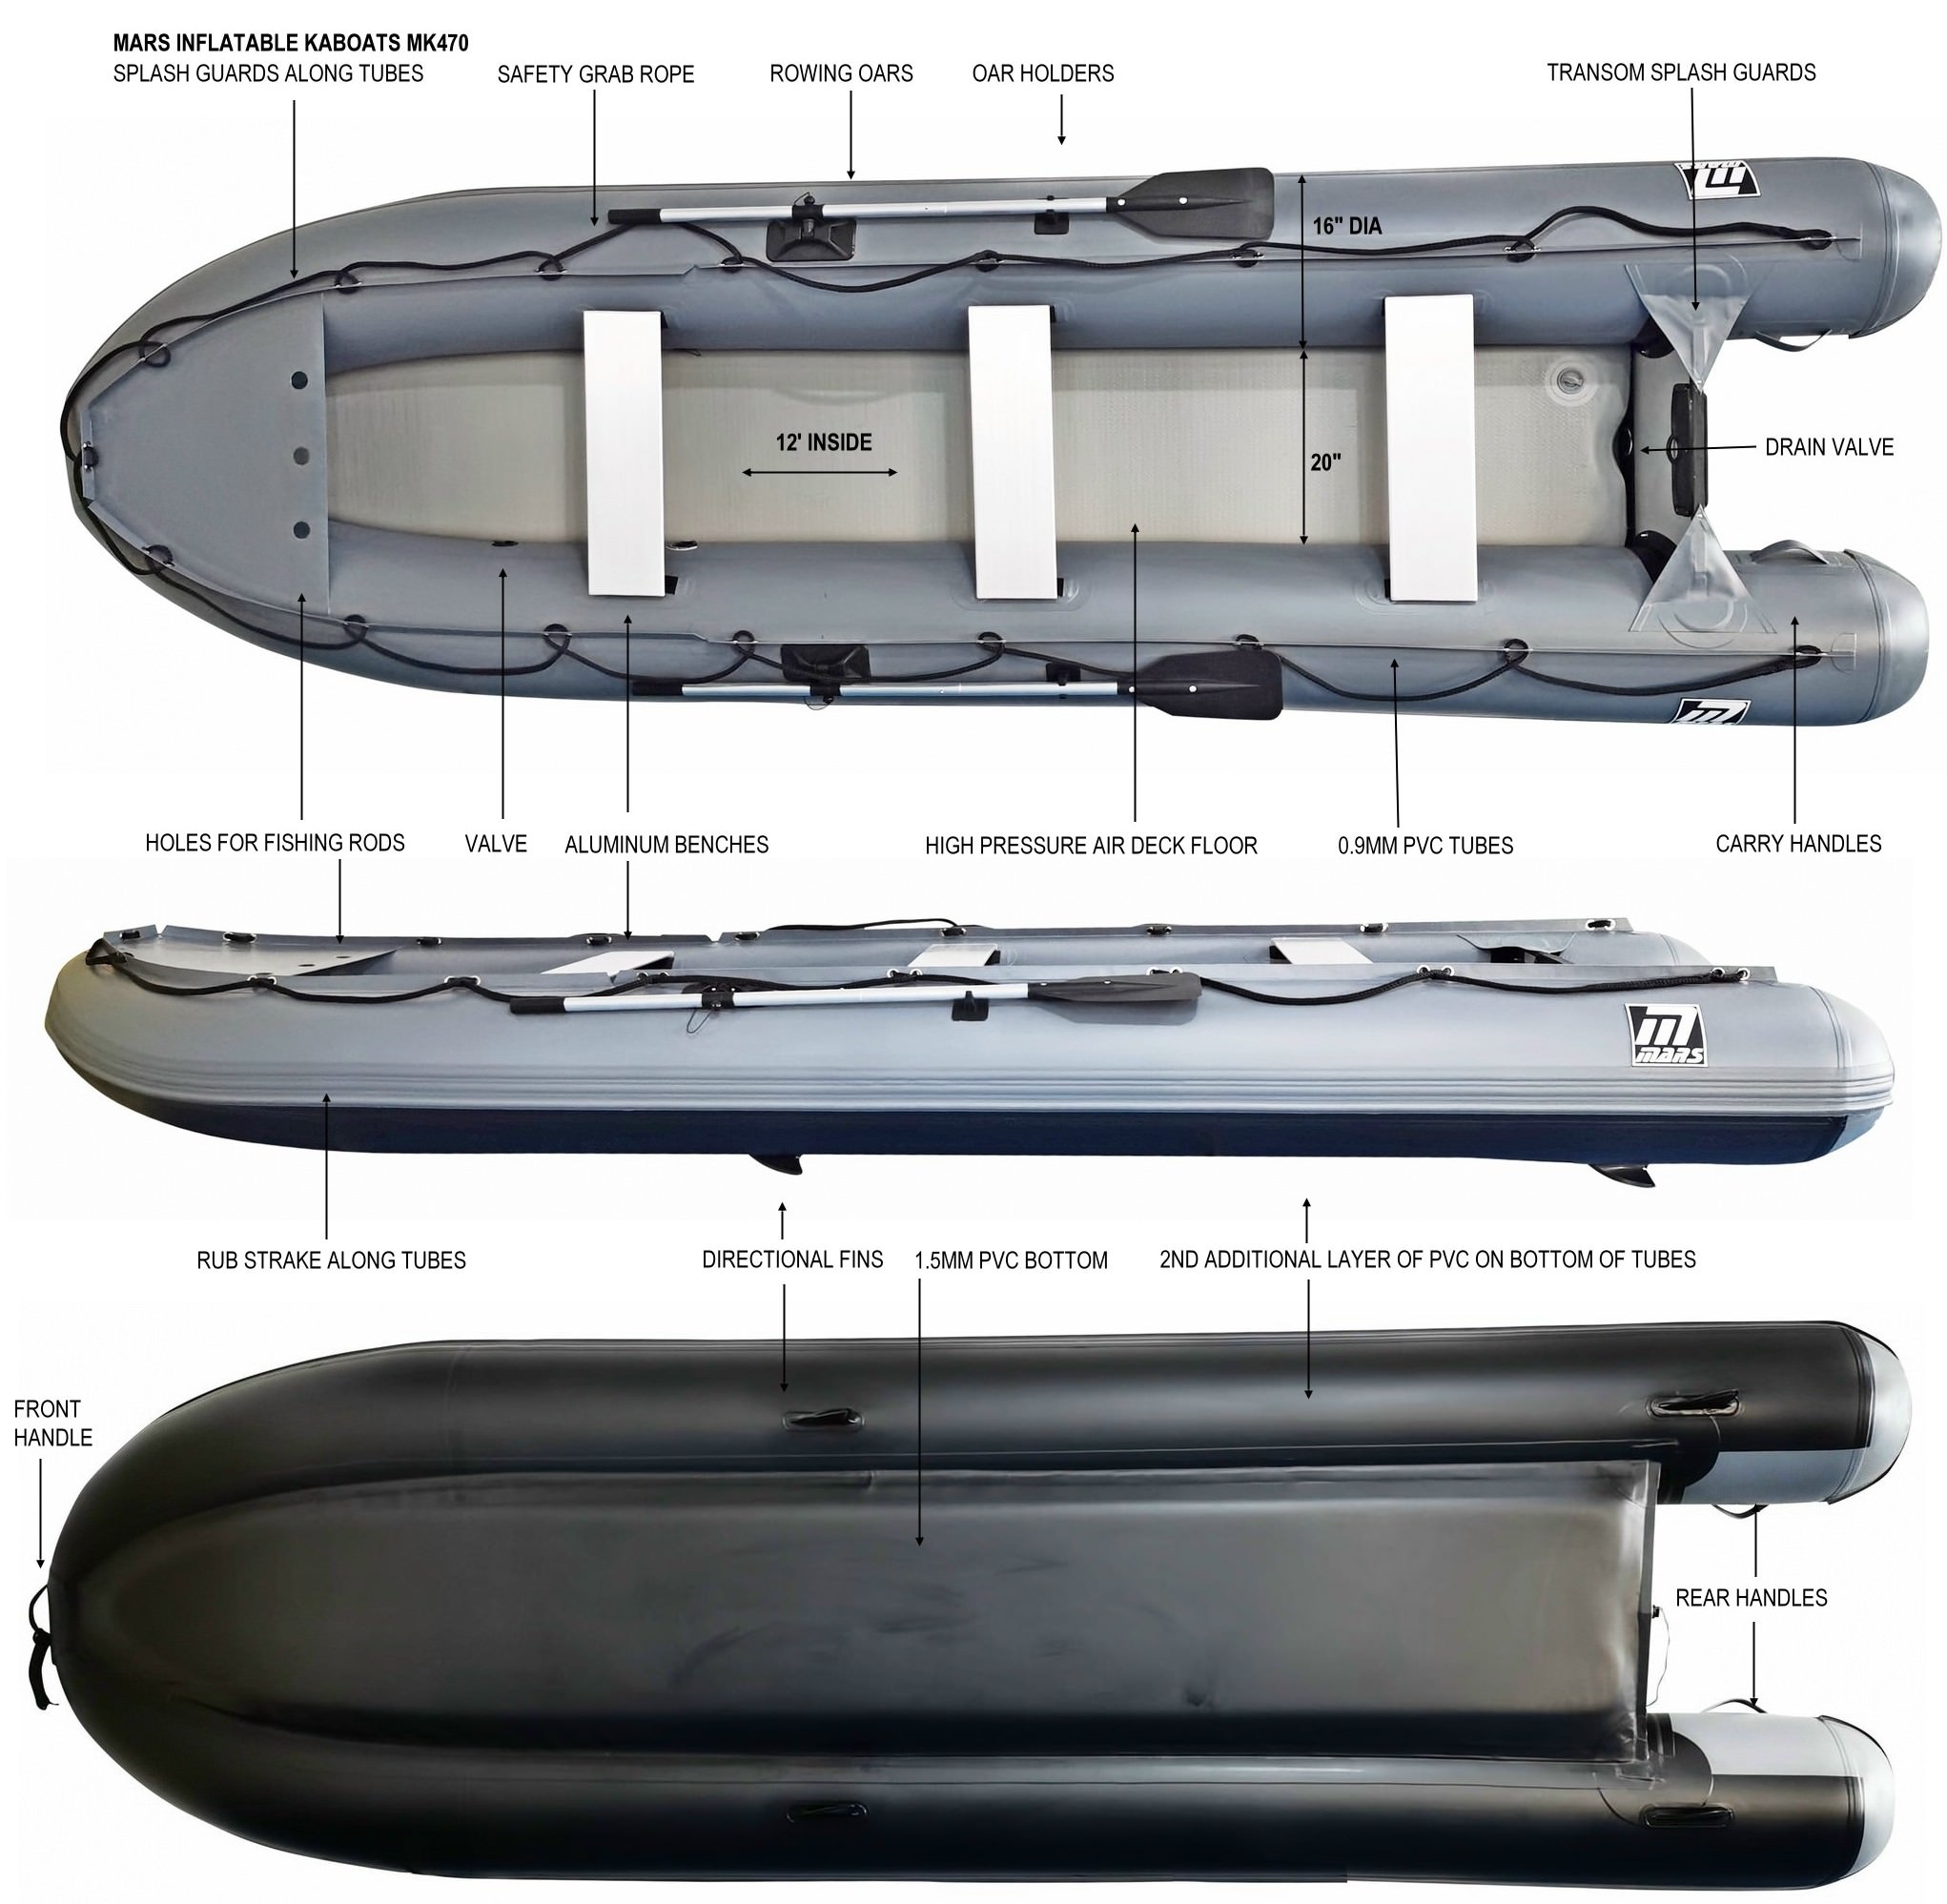 Mars MK470 inflatable kaboat specifications